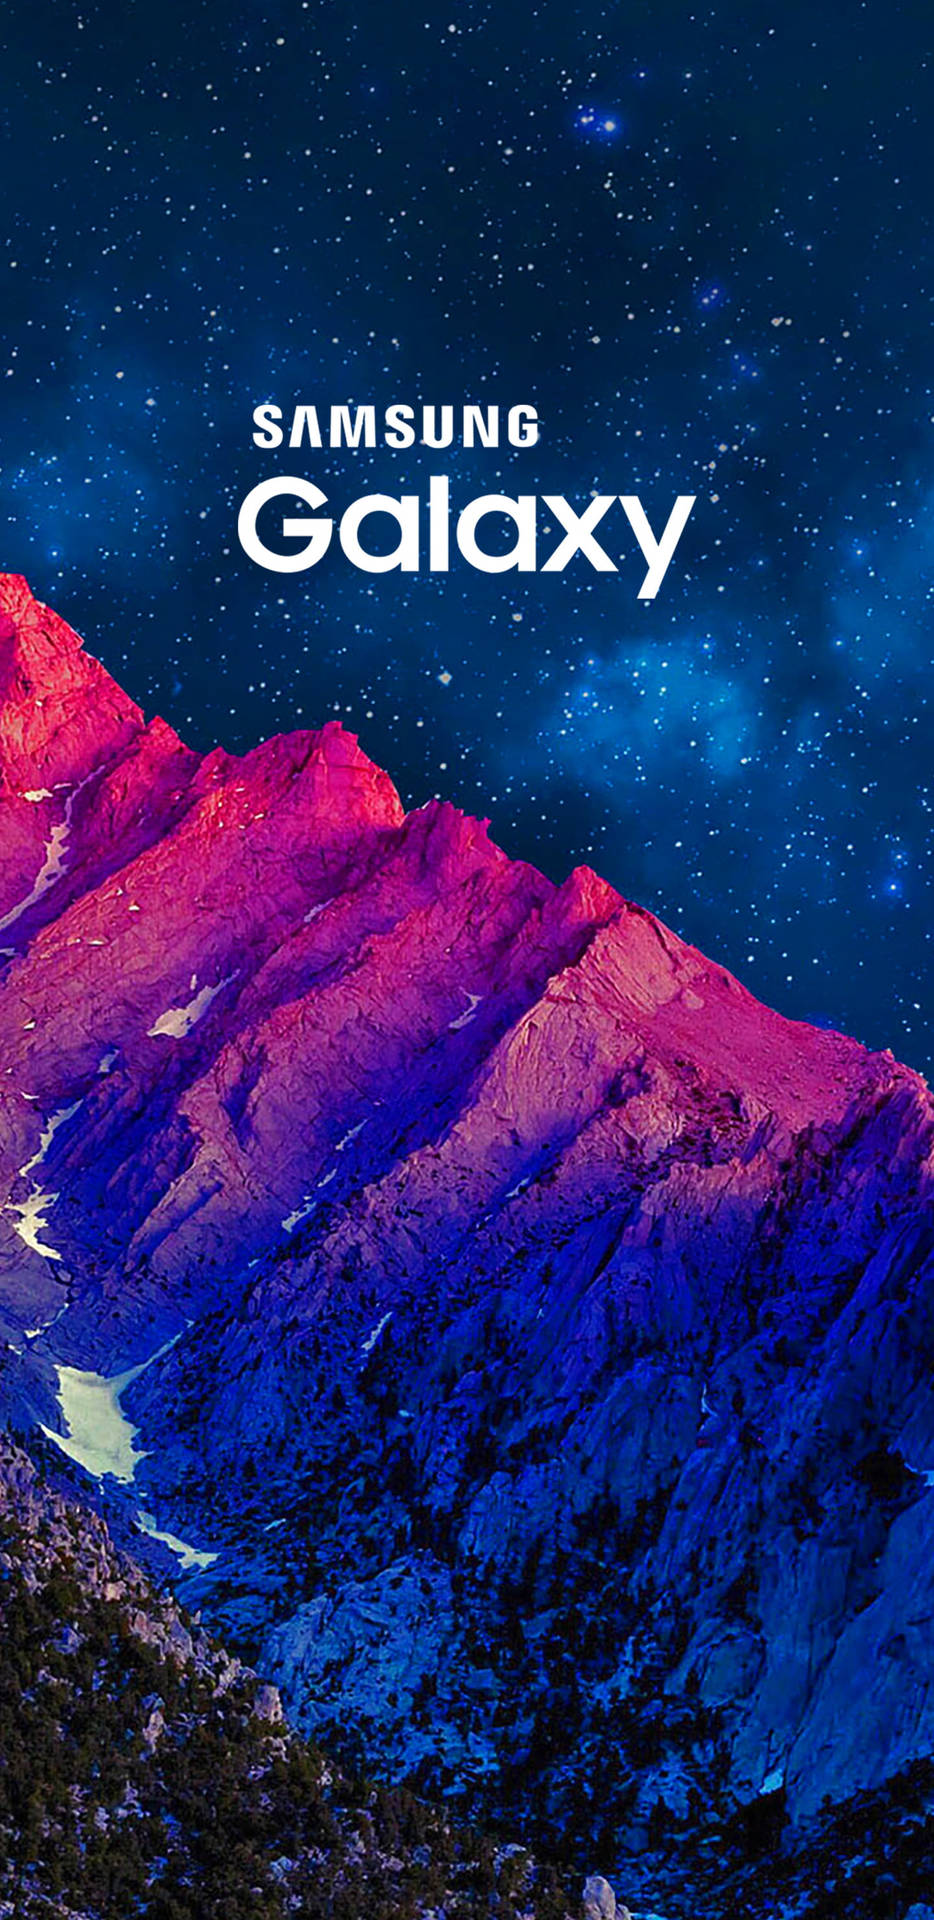 Mountain Under Starry Sky Samsung Full Hd Background